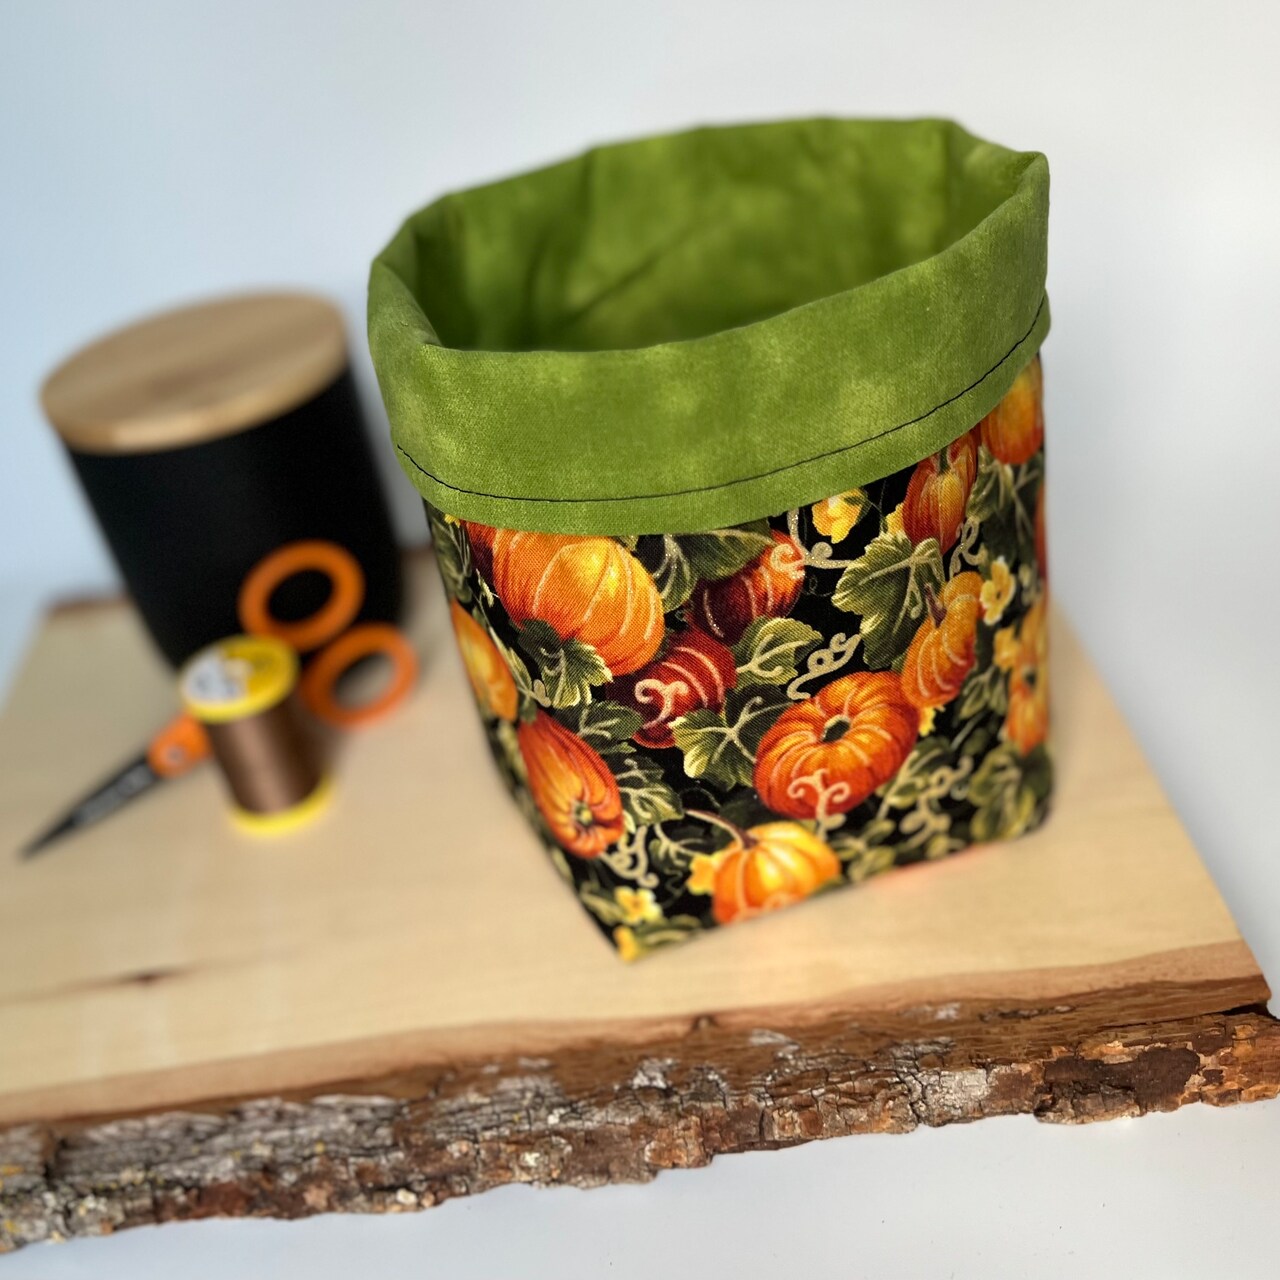 From Square to Storage: Learn How to Sew a Fabric Basket with Kesley Anderson